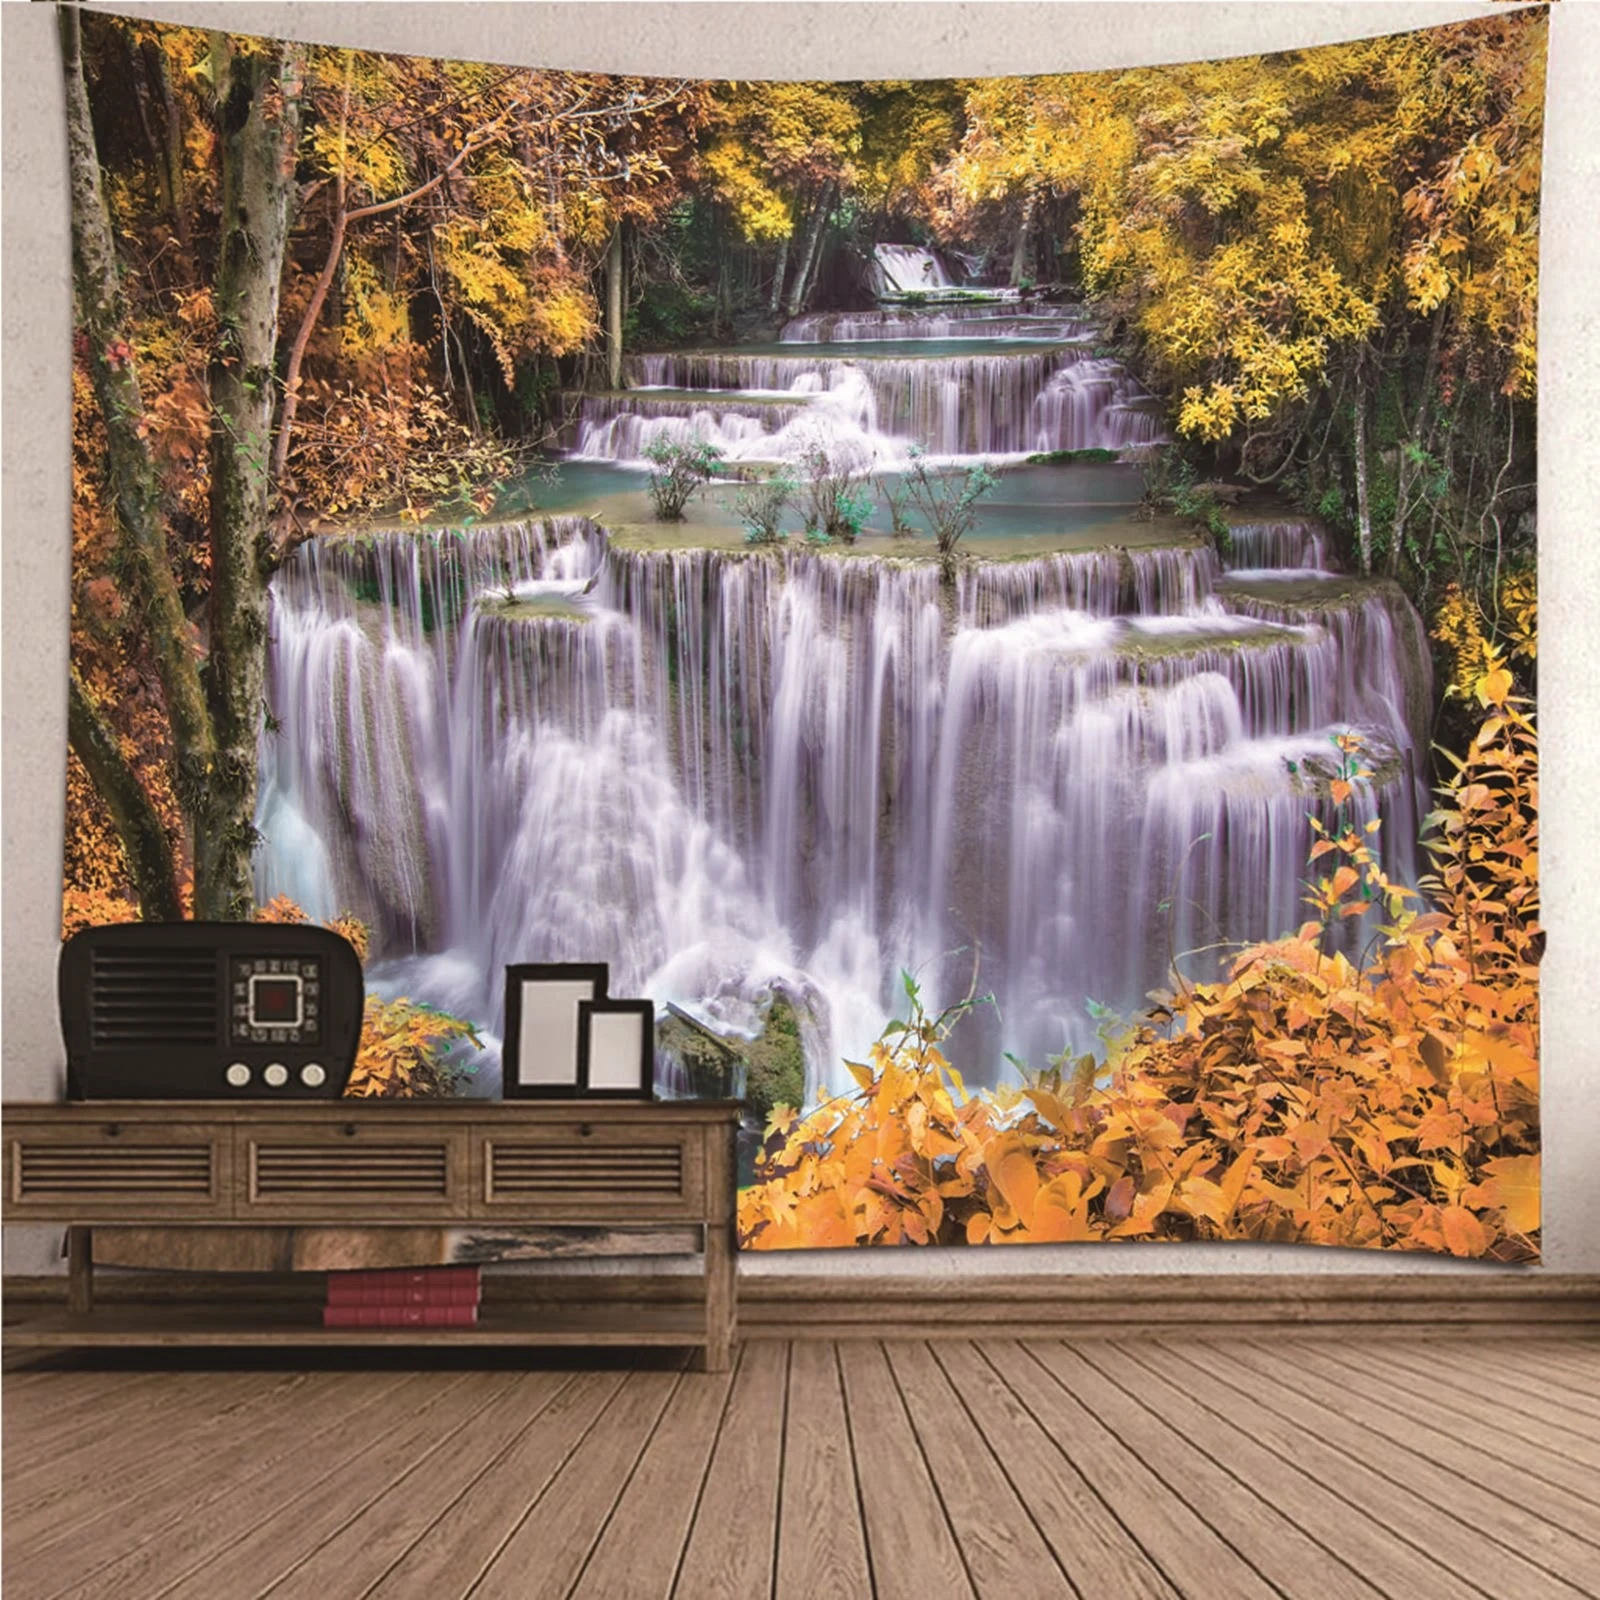 

Tapestry Yoga Small Tapestry Kitchen natural scenery Woods & Waterfalls Wall Hanging Blanket Dorm Art Decor Covering